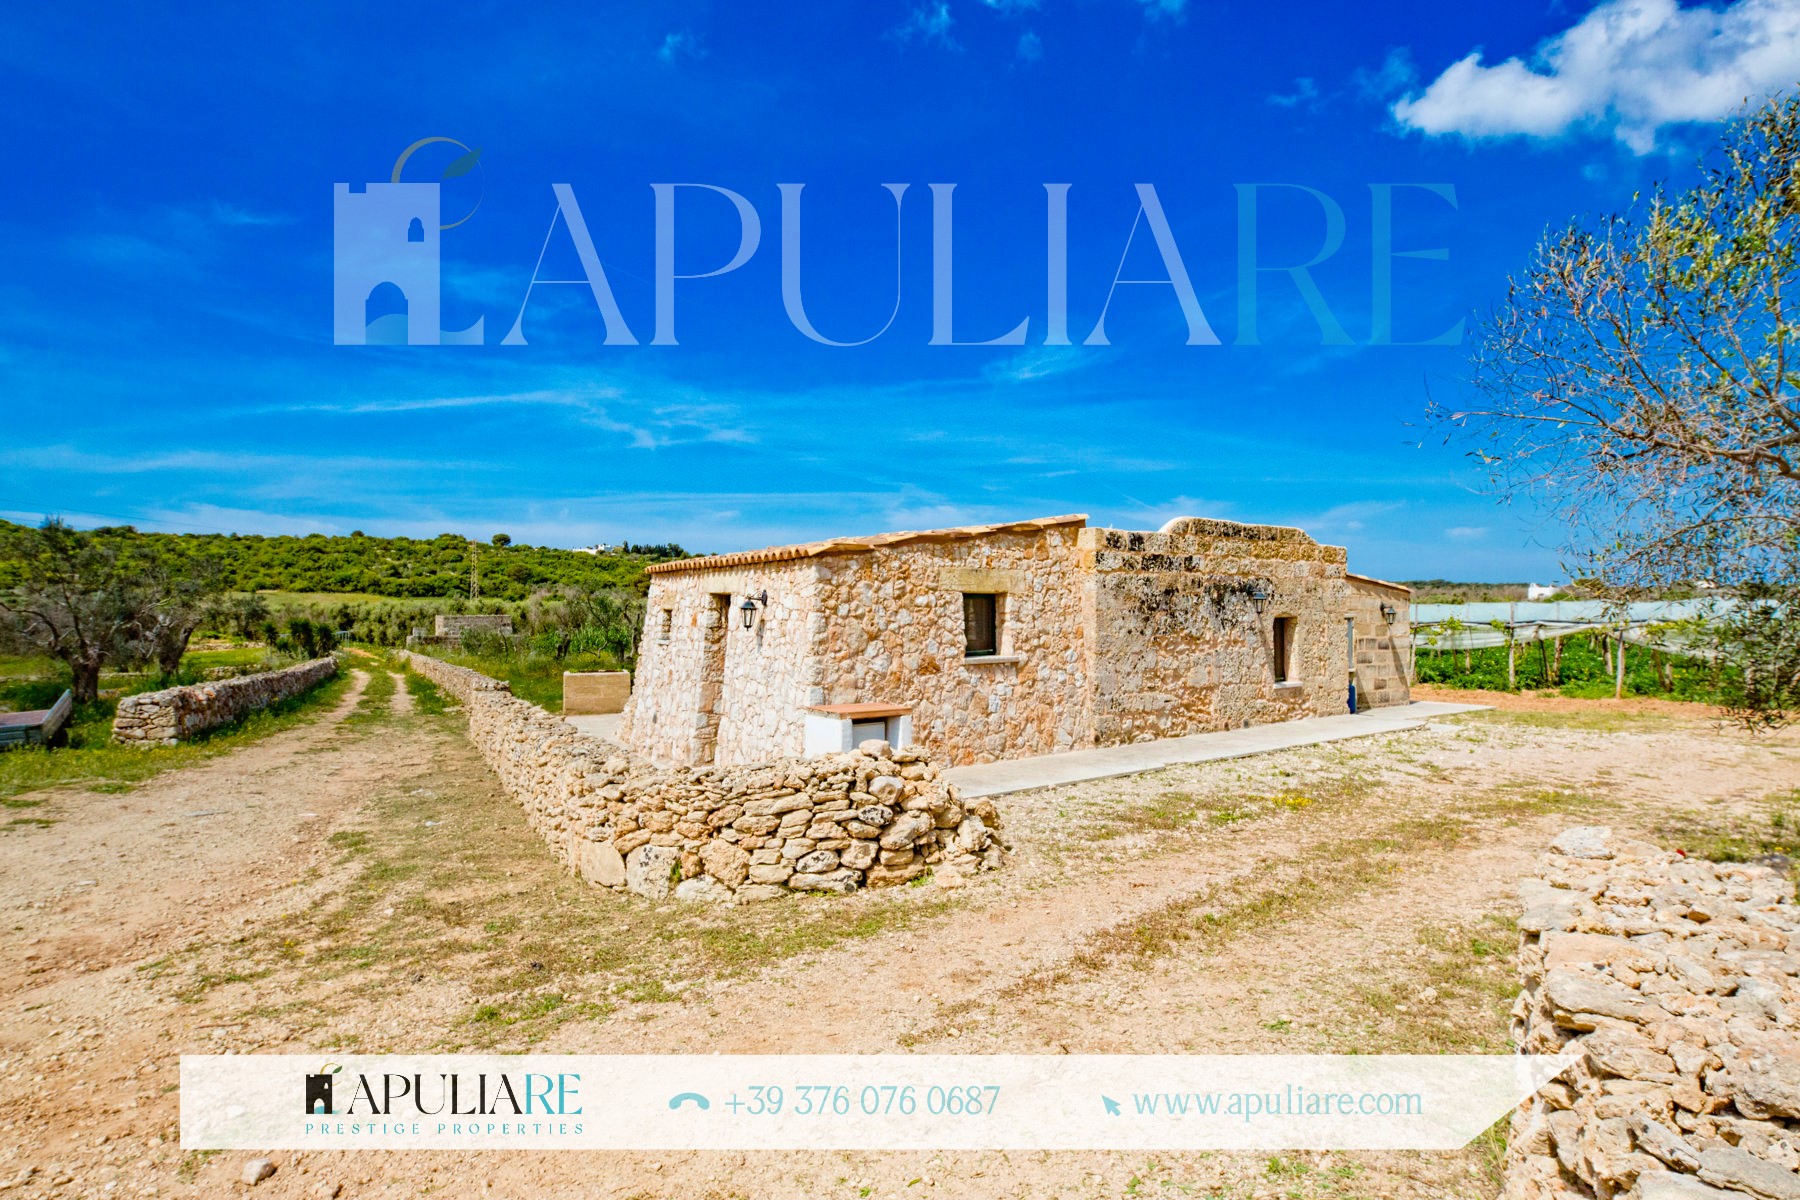 Masseria with agritourism company for sale in Salve, near a sandy beach (Salento). Very good investment!